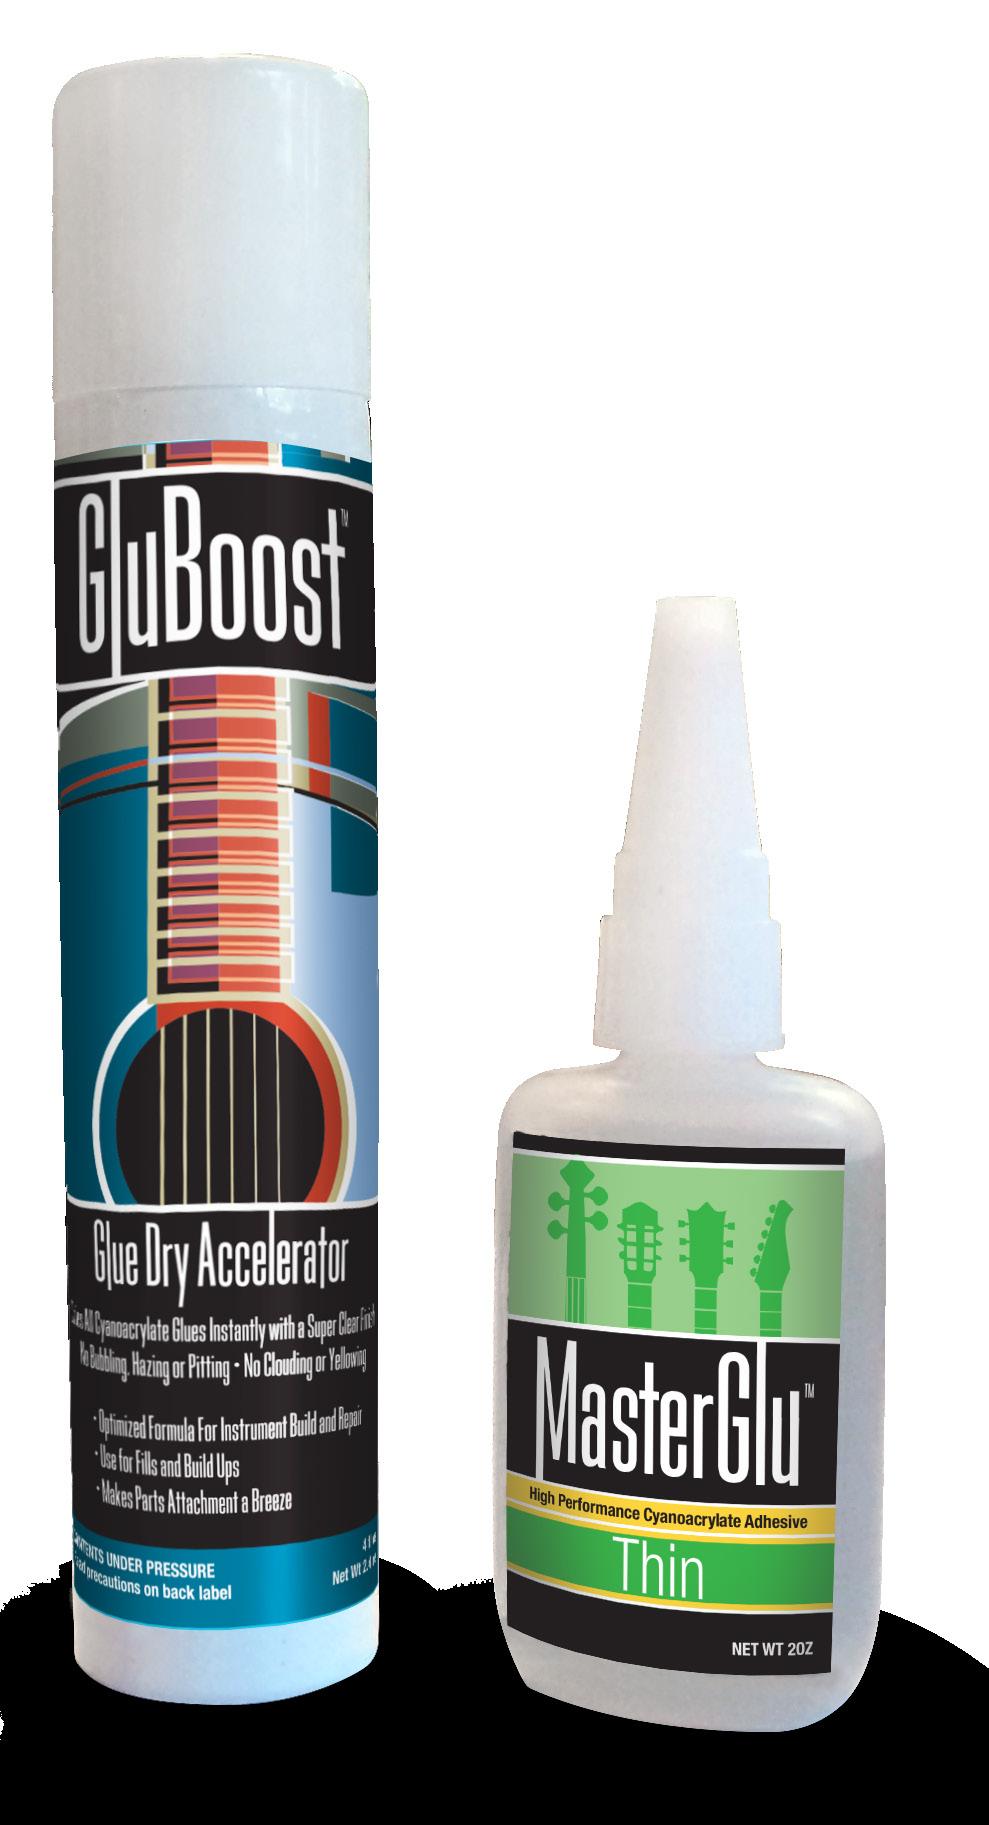 Our MasterGlu line of adhesives are purer, safer, fresher, better looking, and are more workable glues, which is what truly separates MasterGlu from other store bought or supplier bought super glues.